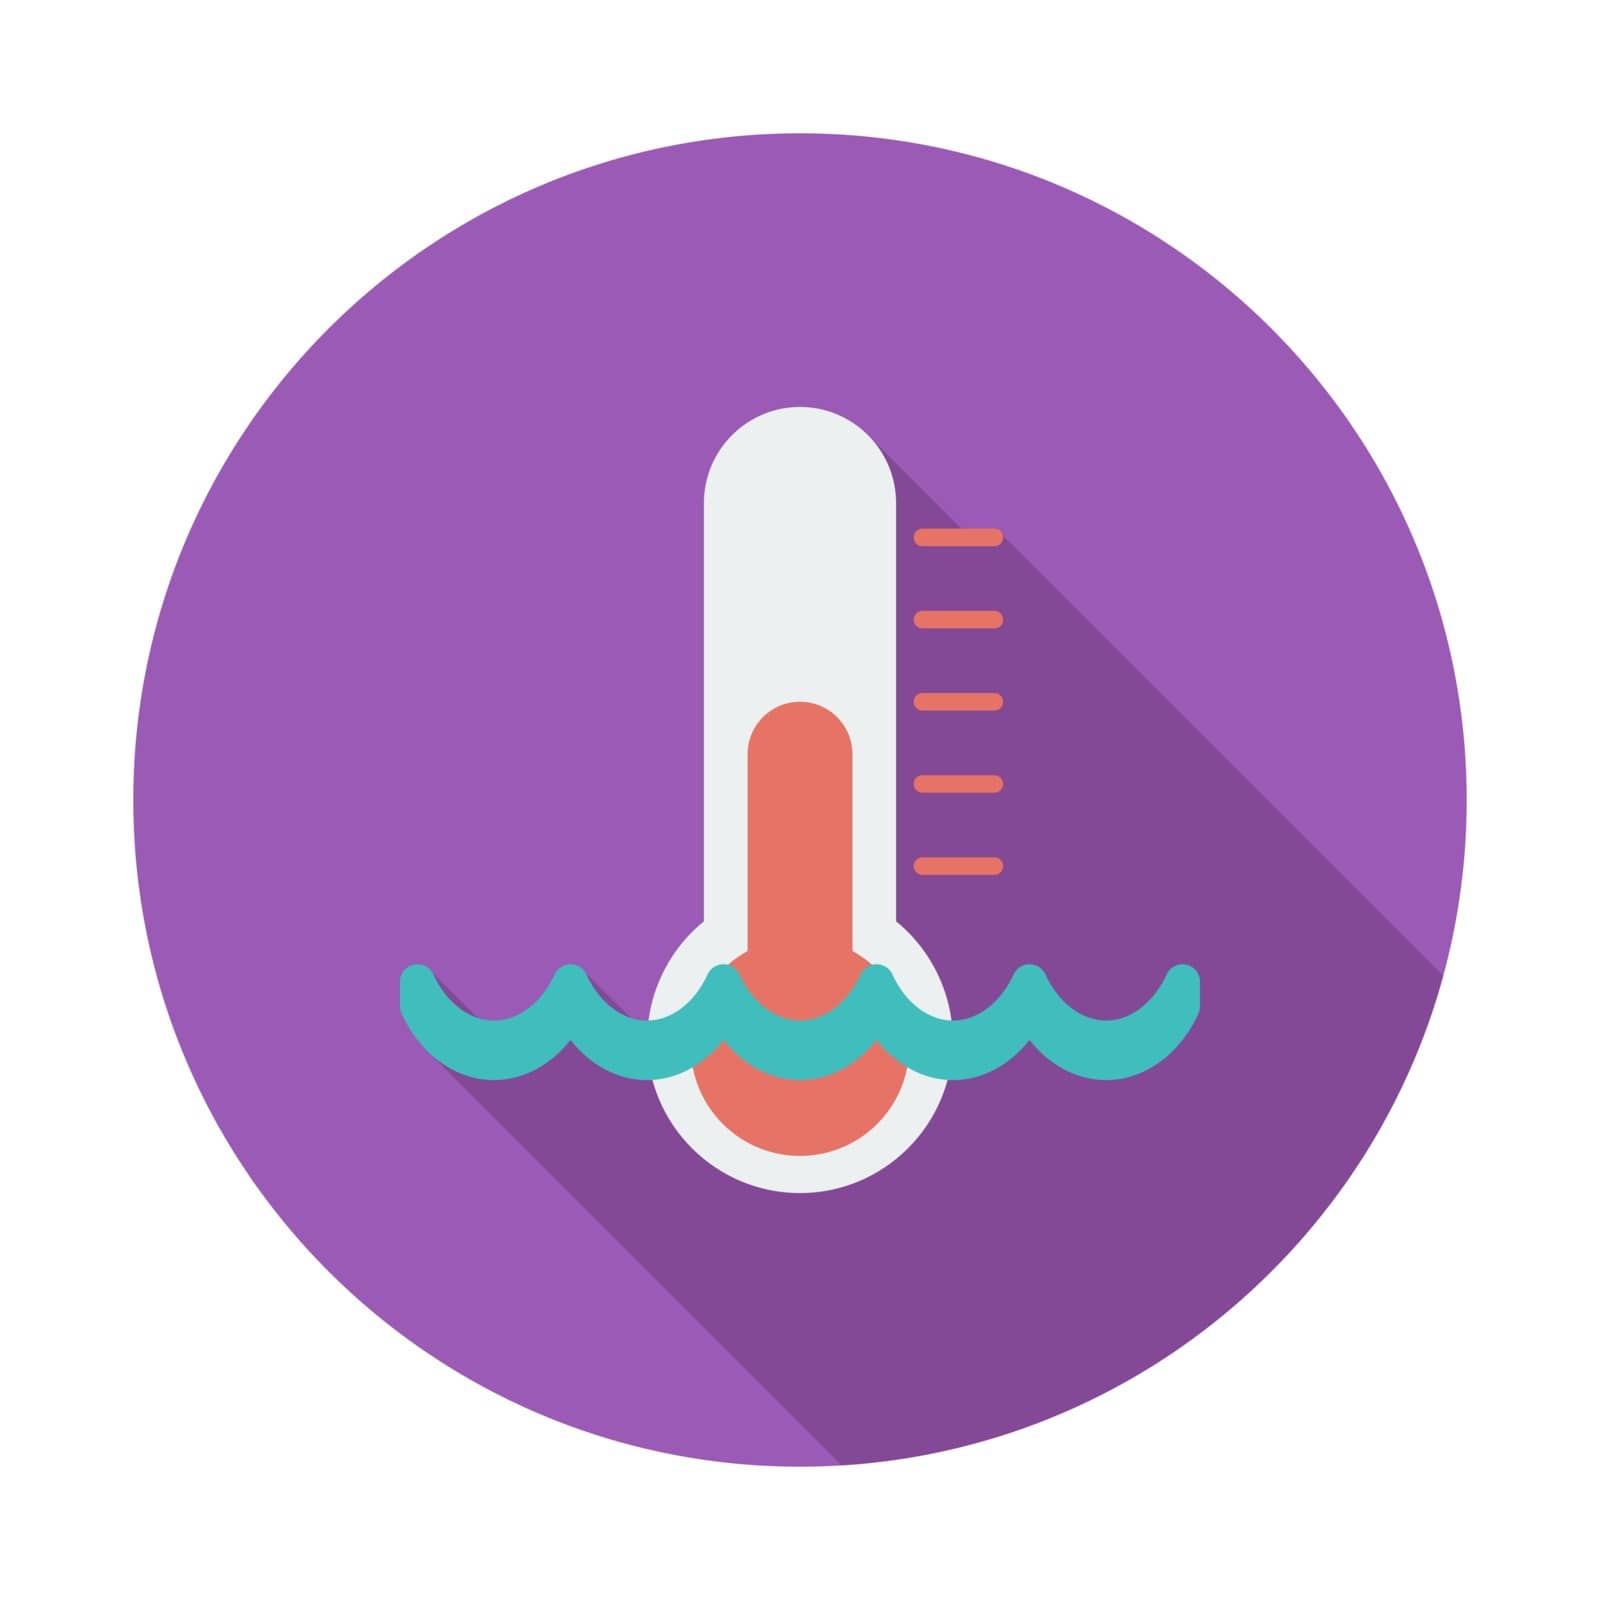 Thermometer. Single flat color icon. Vector illustration.